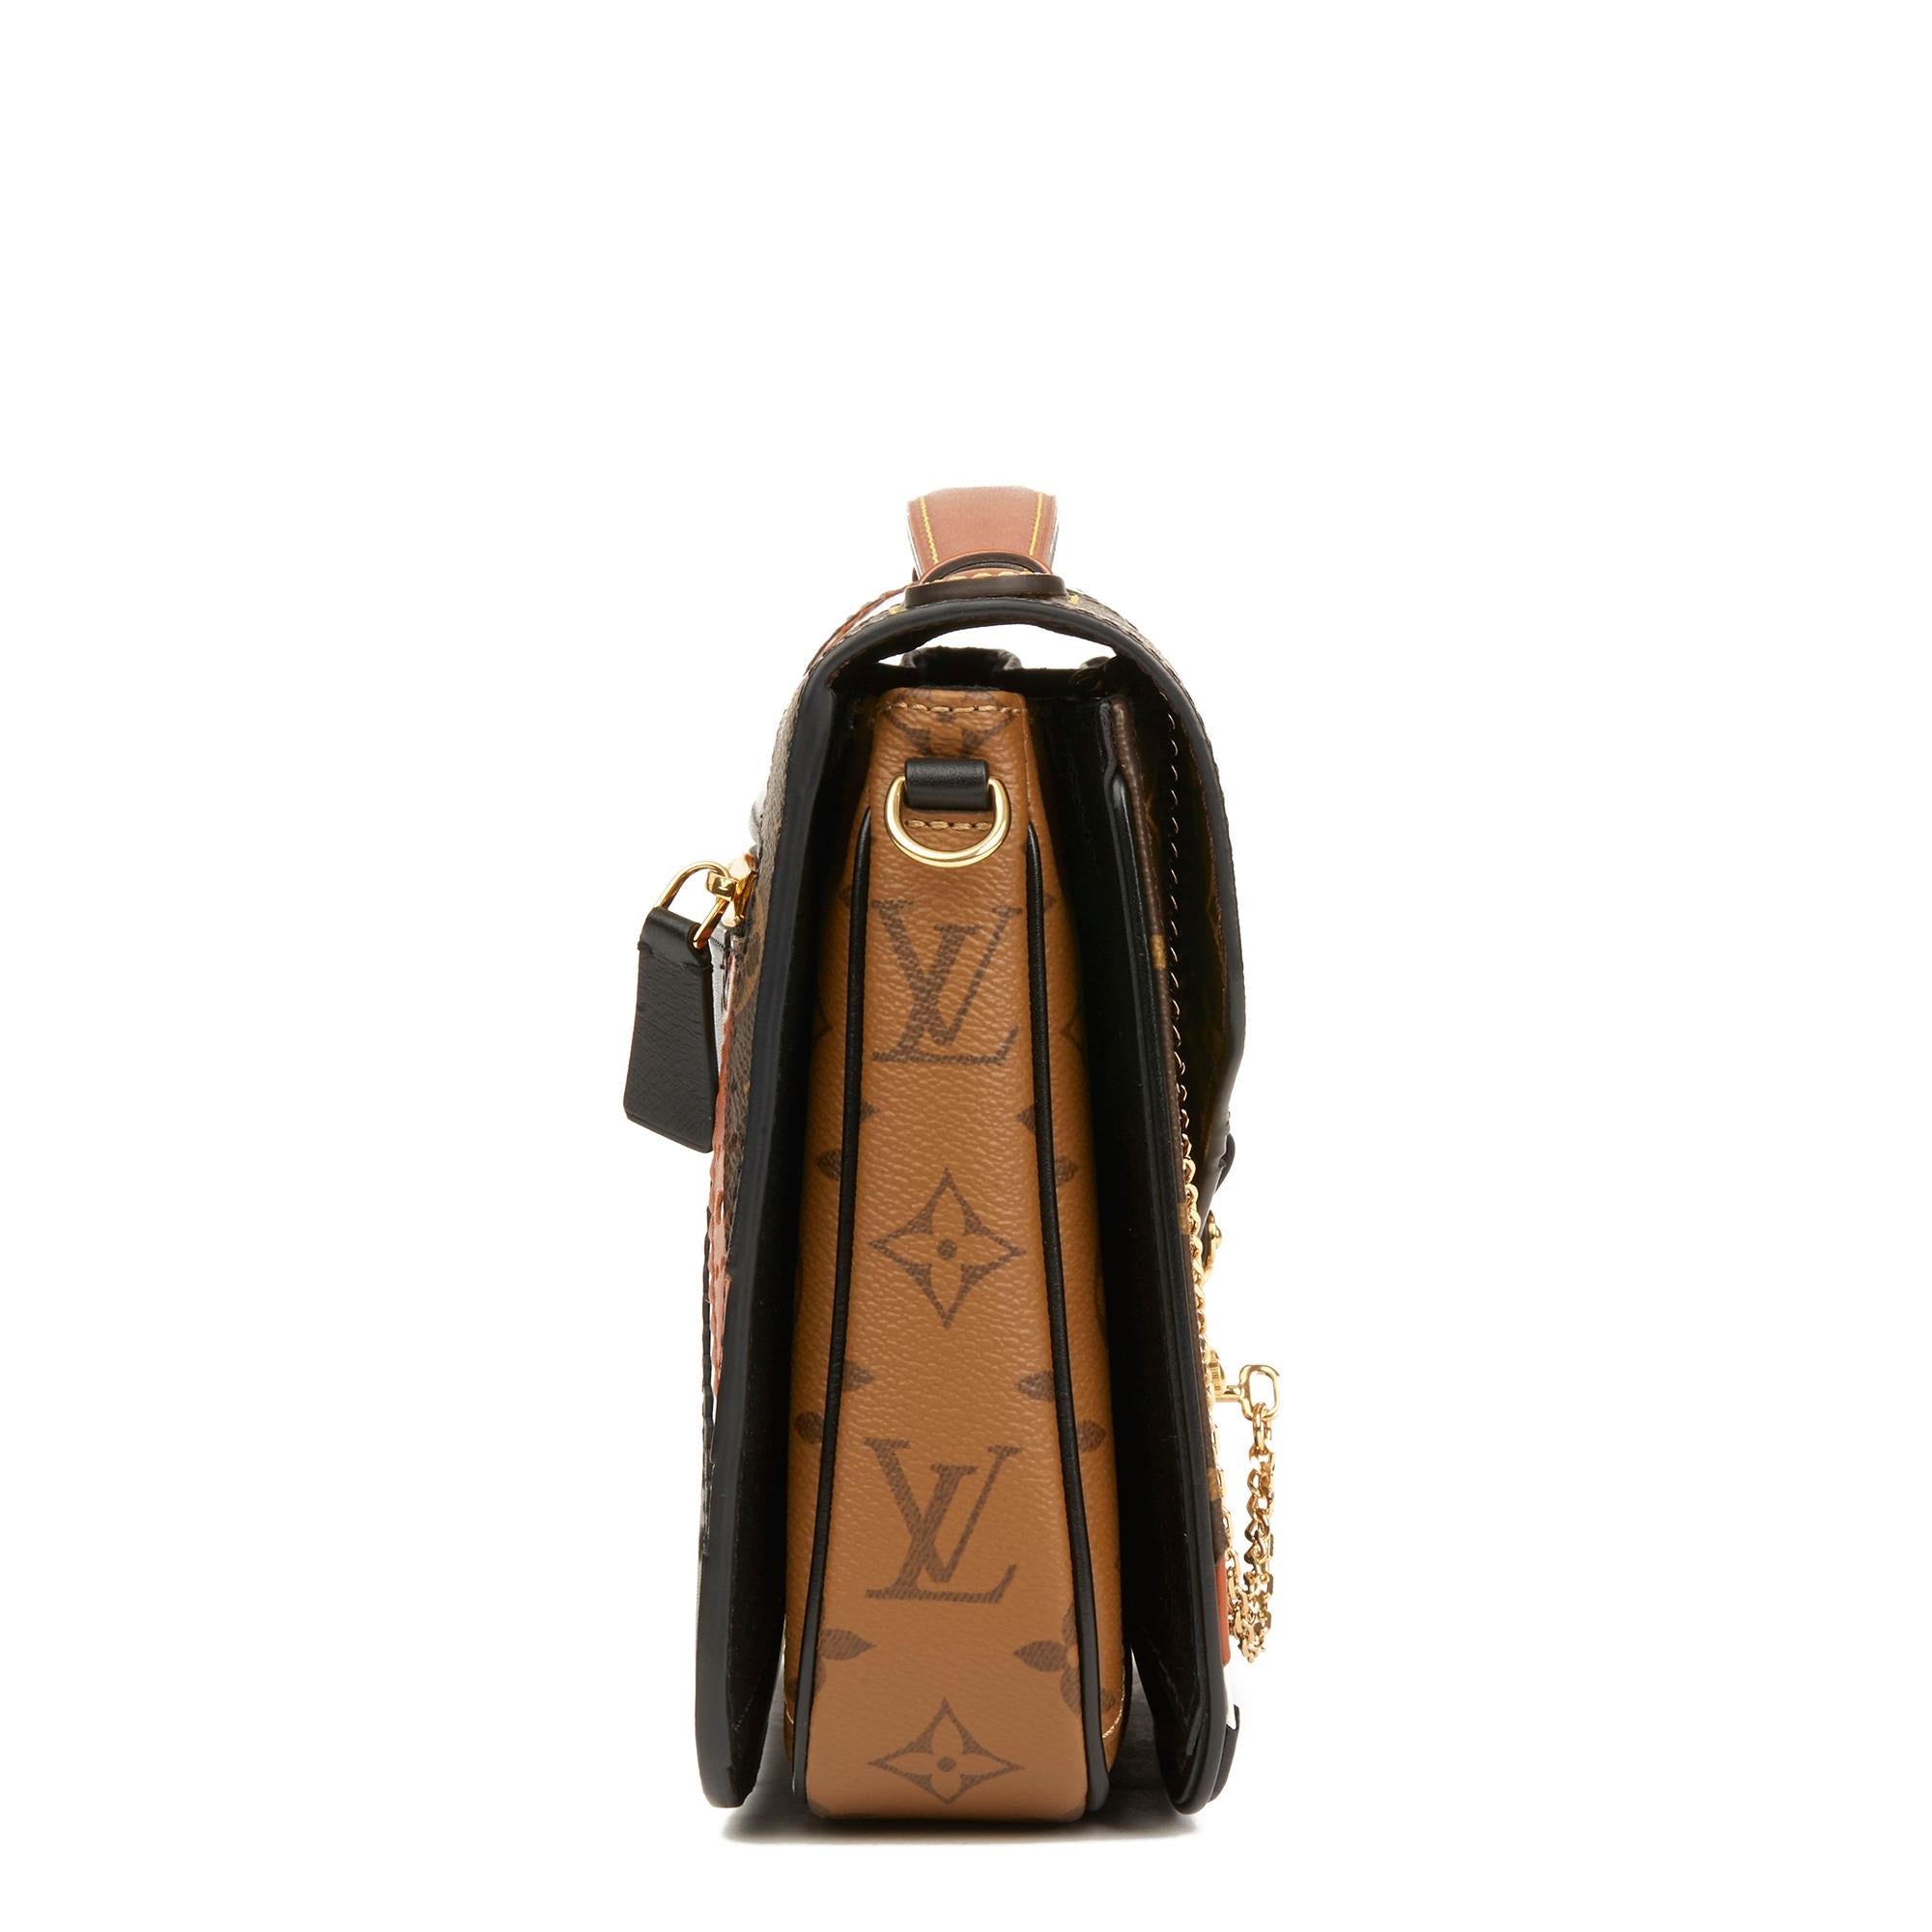 LOUIS VUITTON
Brown, Black, White Calfskin Leather & Brown Monogram Coated Canvas Brogue Pochette Metis

 Reference: HB2845
Serial Number: PL1377
Age (Circa): 2017
Accompanied By: Louis Vuitton Dust Bag, Shoulder Strap, Key Charm
Authenticity